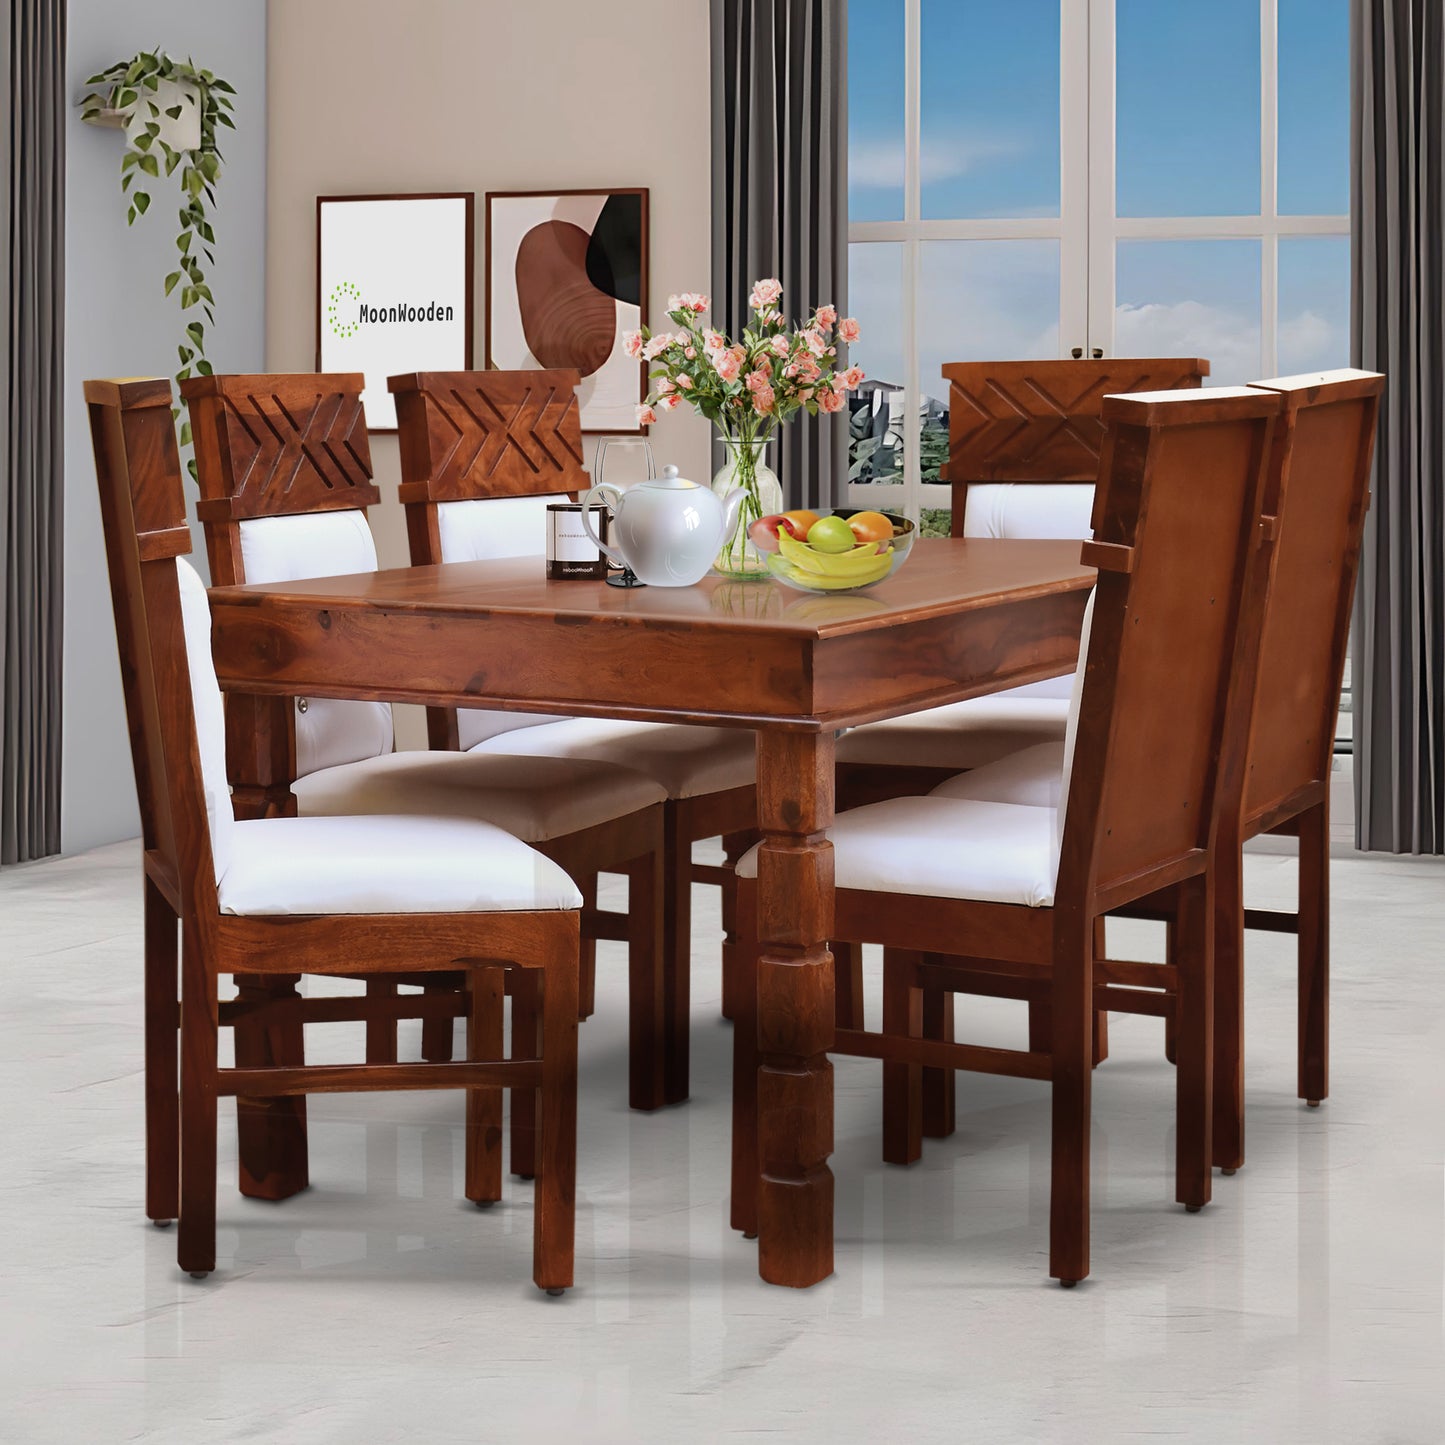 MoonWooden Solid Wood 6 Seater Dining Table Set with 6 Chair for Home & Office Furniture| Hotel & Dinner | Drawing Room Furniture with Honney Finish